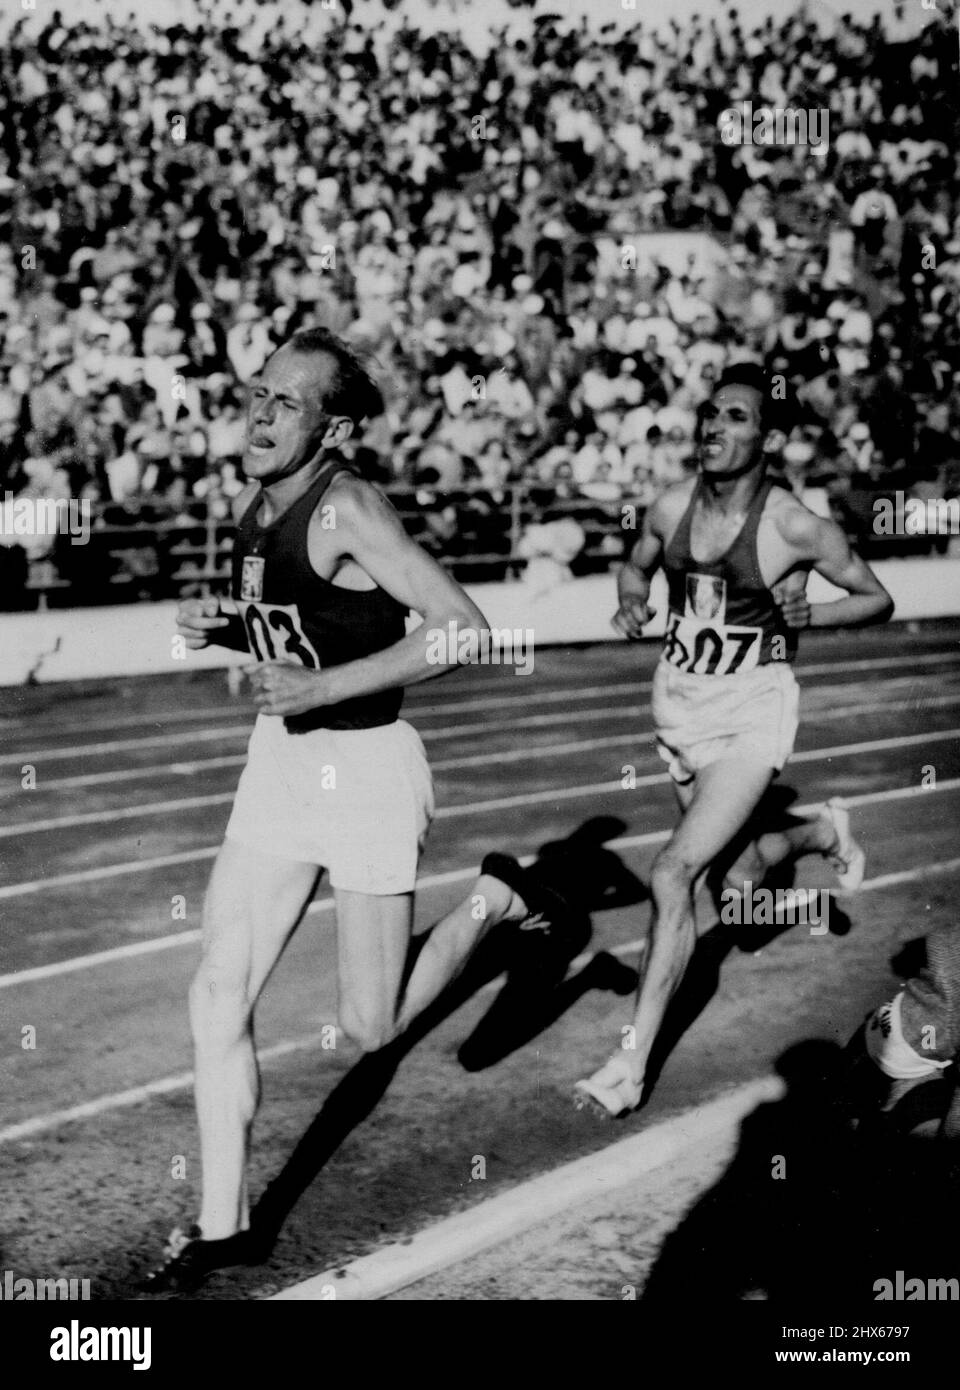 Zatopek Wins 10,000 Metres And Gains First 1952 Olympics Gold Medal -- Emil Zatopek, the flying Czech Army major, leading A. Mimoun, of France, who was second, in the last lap of the gruelling 10,000 metres in the Olympic Games here. Shaking off the challenge by the Frenchman, Zatopek covered the distance in 29 minutes and 17 seconds. His time knocks 42.6 seconds off the record he set up at Wembley in 1948 and was only 14.4 seconds slower than his own world record made in his own country two yea Stock Photo